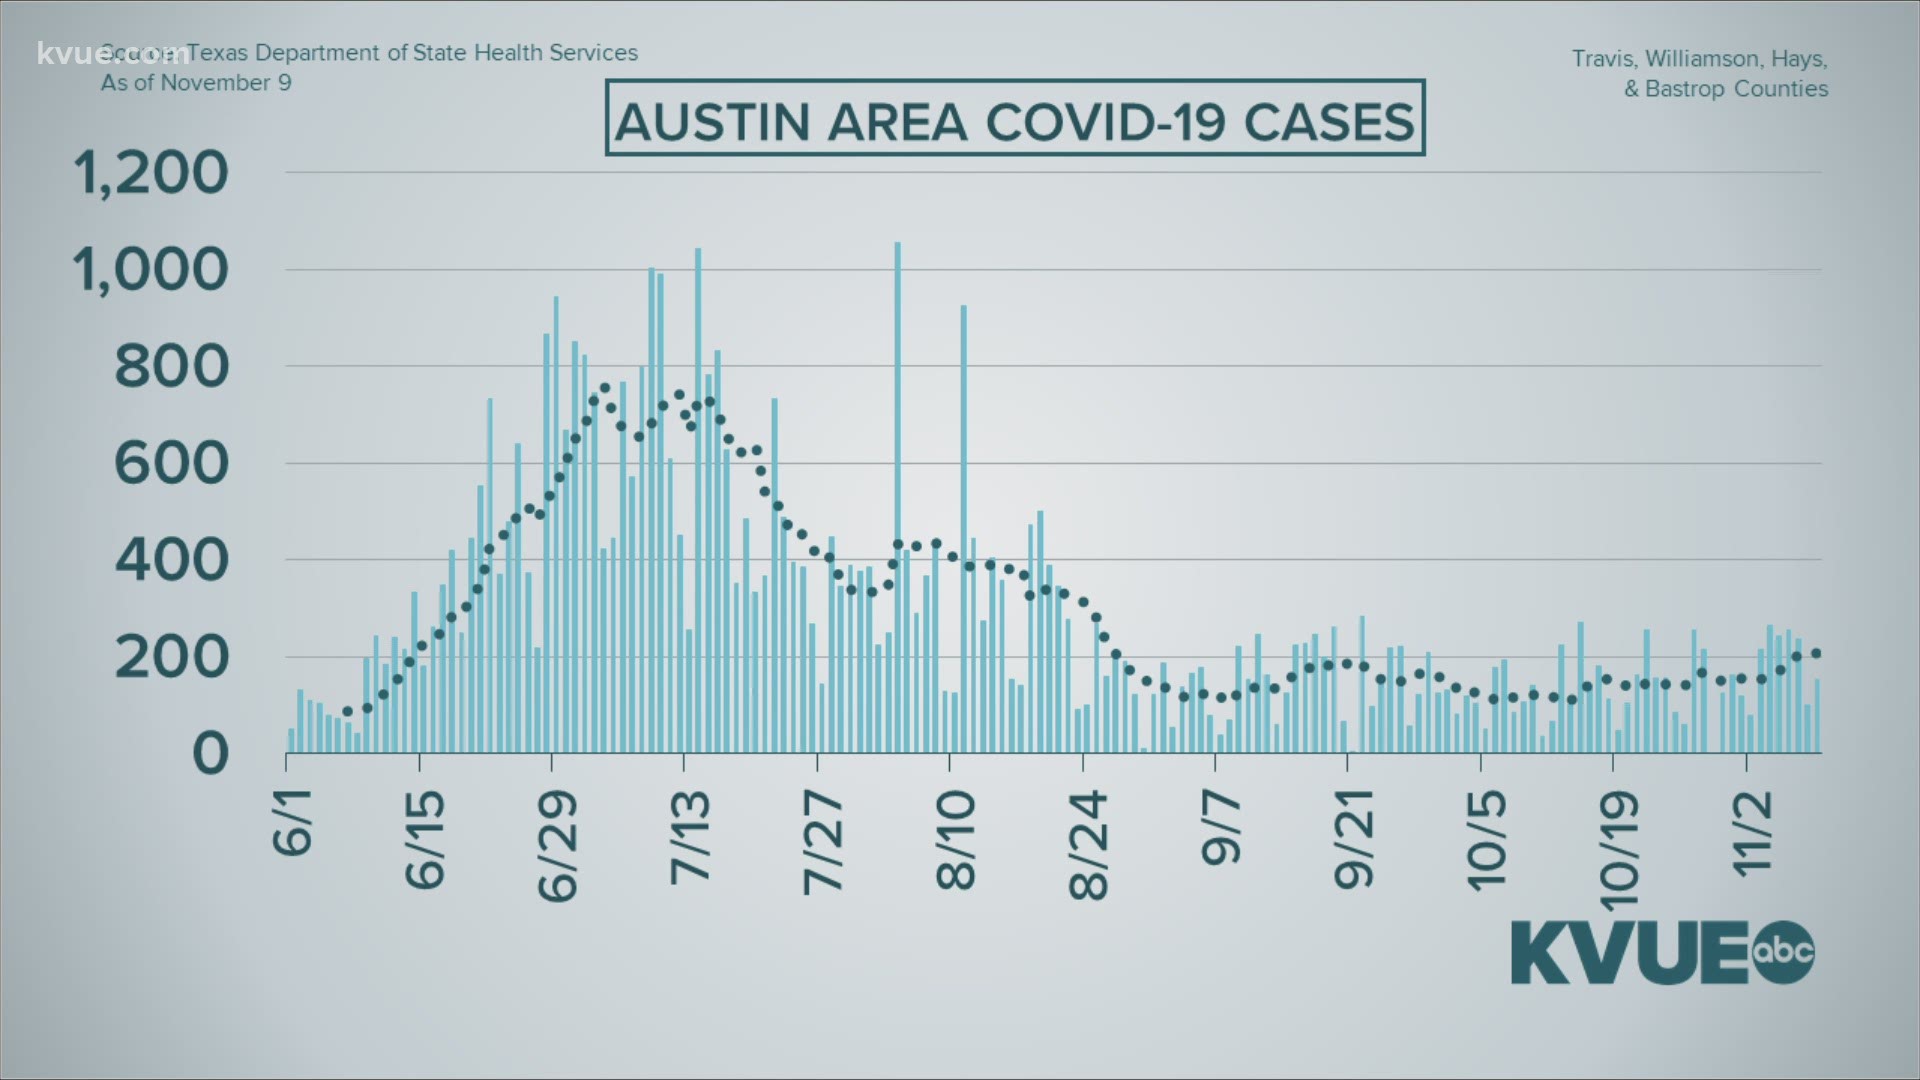 On Nov. 9, the seven-day average for new COVID-19 cases was the highest it had been since August.